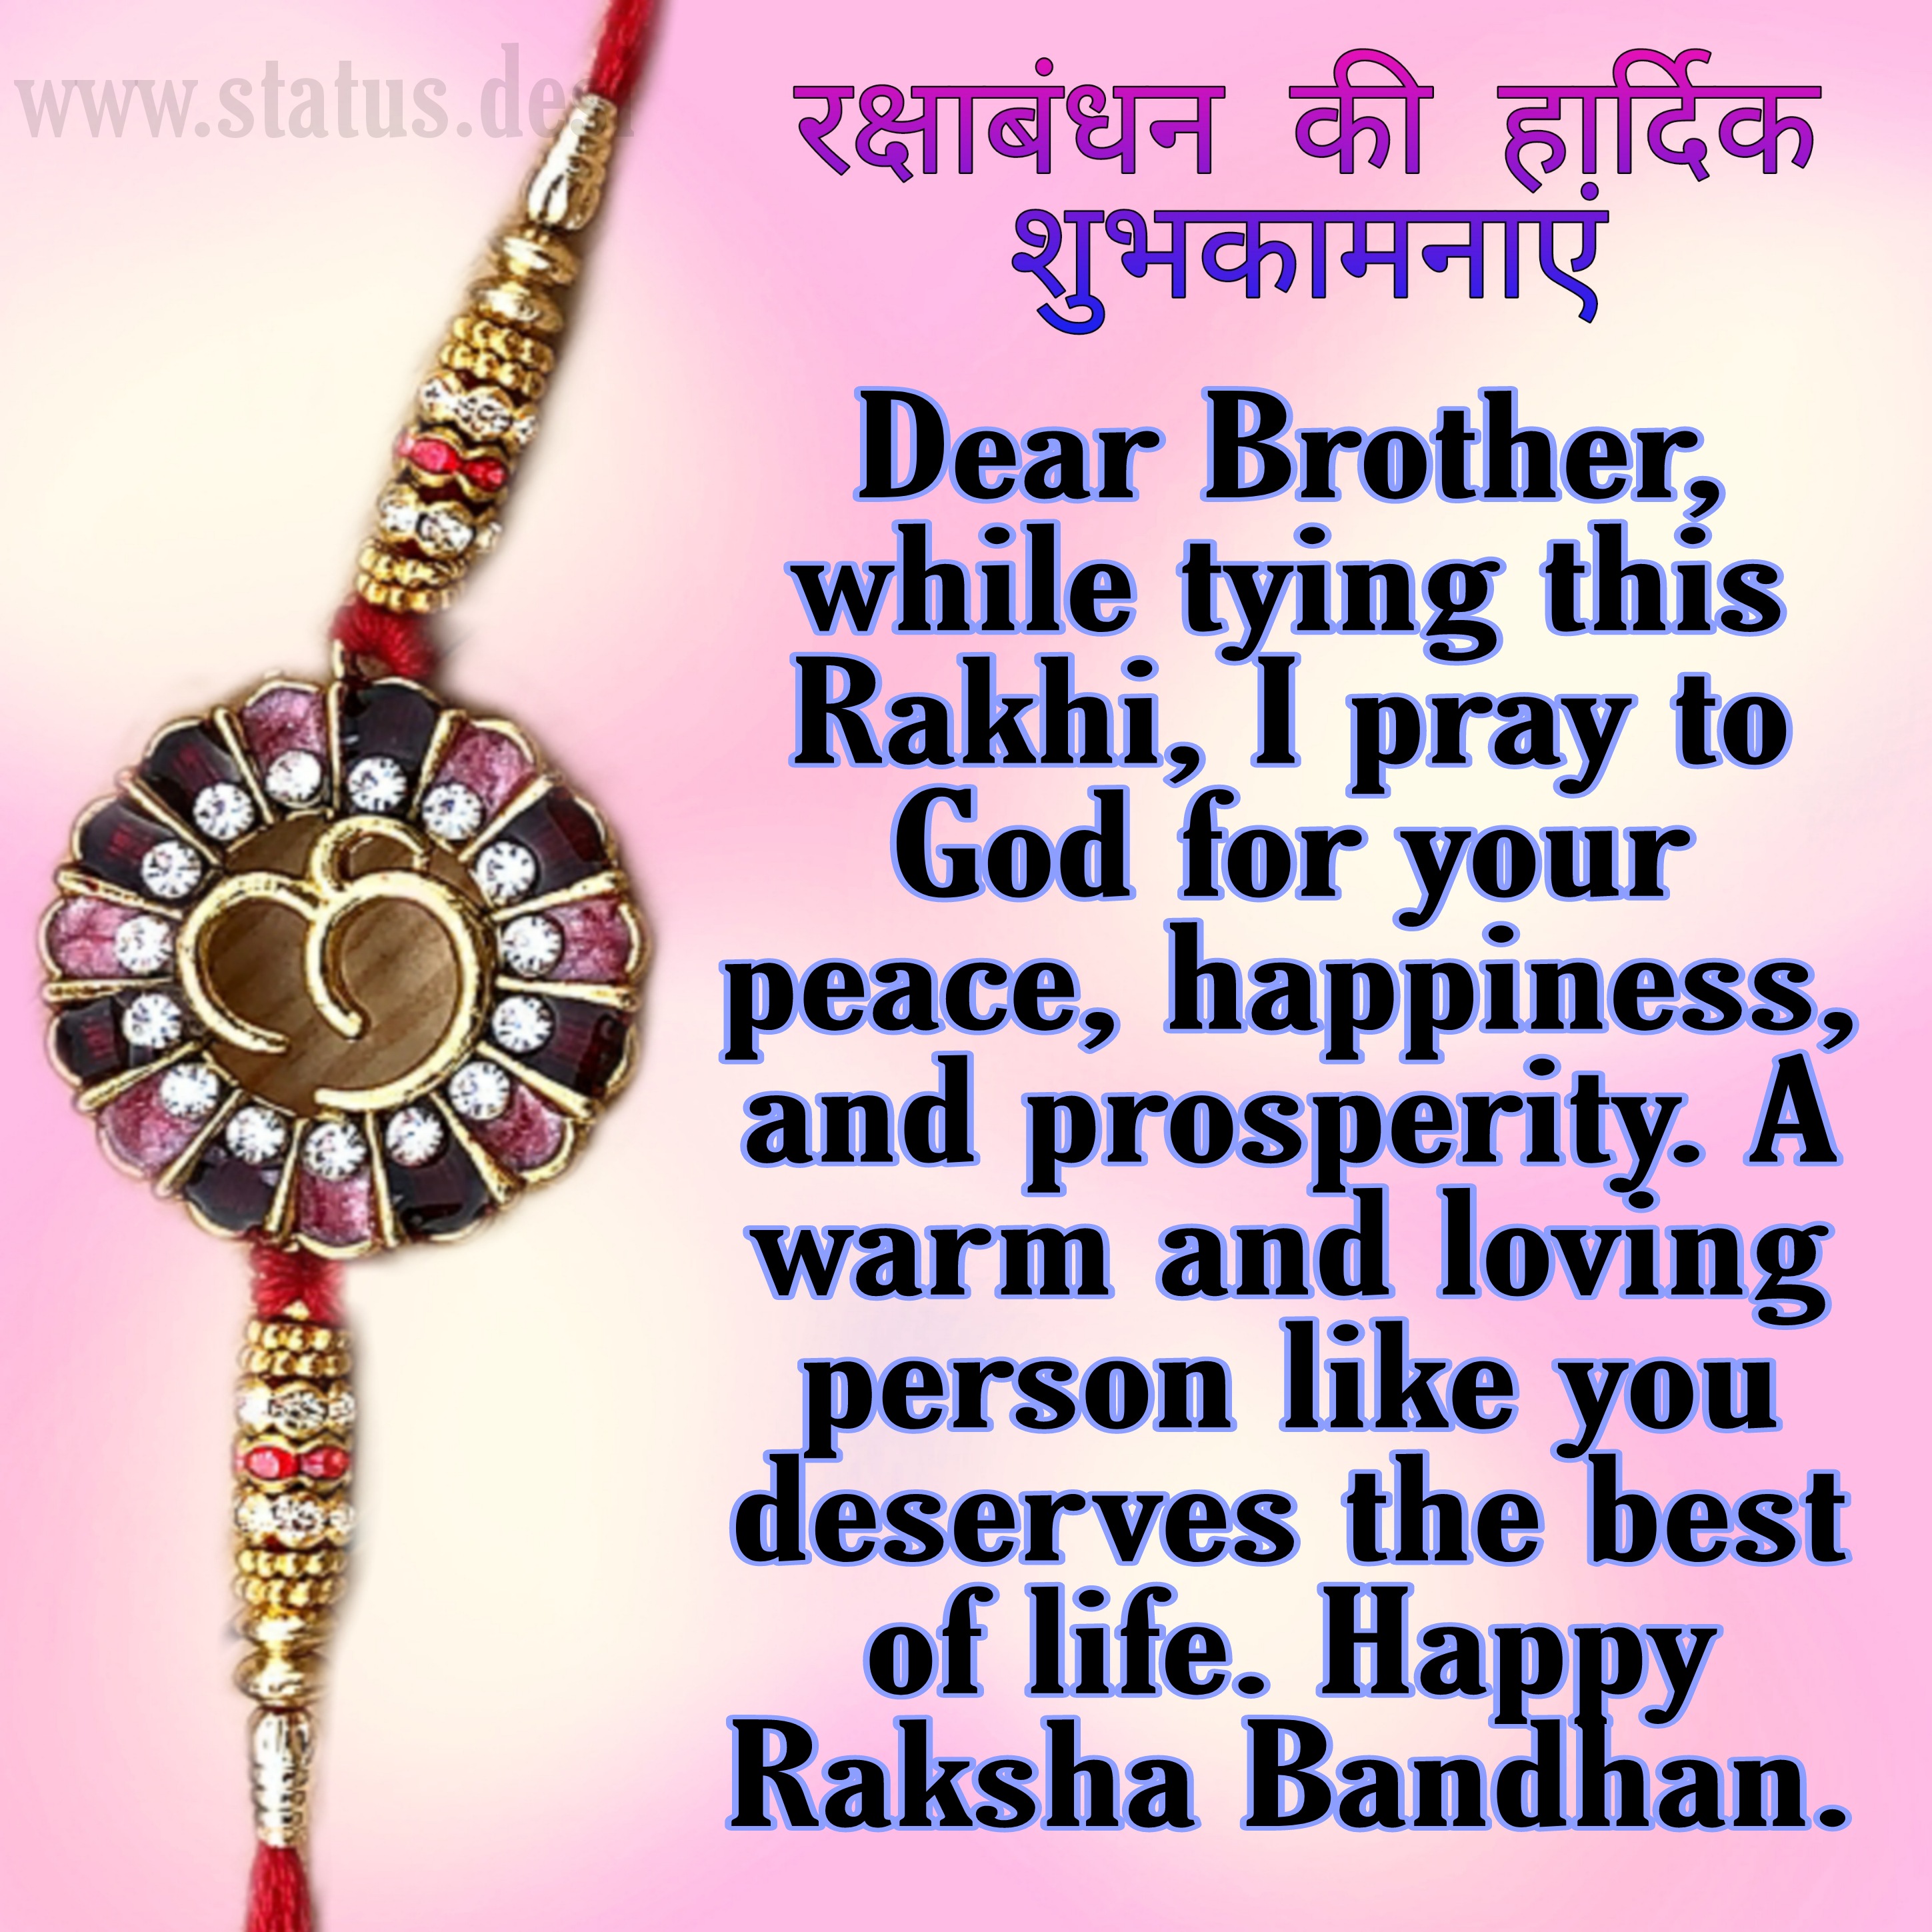 WISH RAKHI STATUS IN ENGLISH Dear Brother, while tying this Rakhi, I pray  to God for your peace, happiness, and prosperity. A warm and loving person  like you deserves the best of